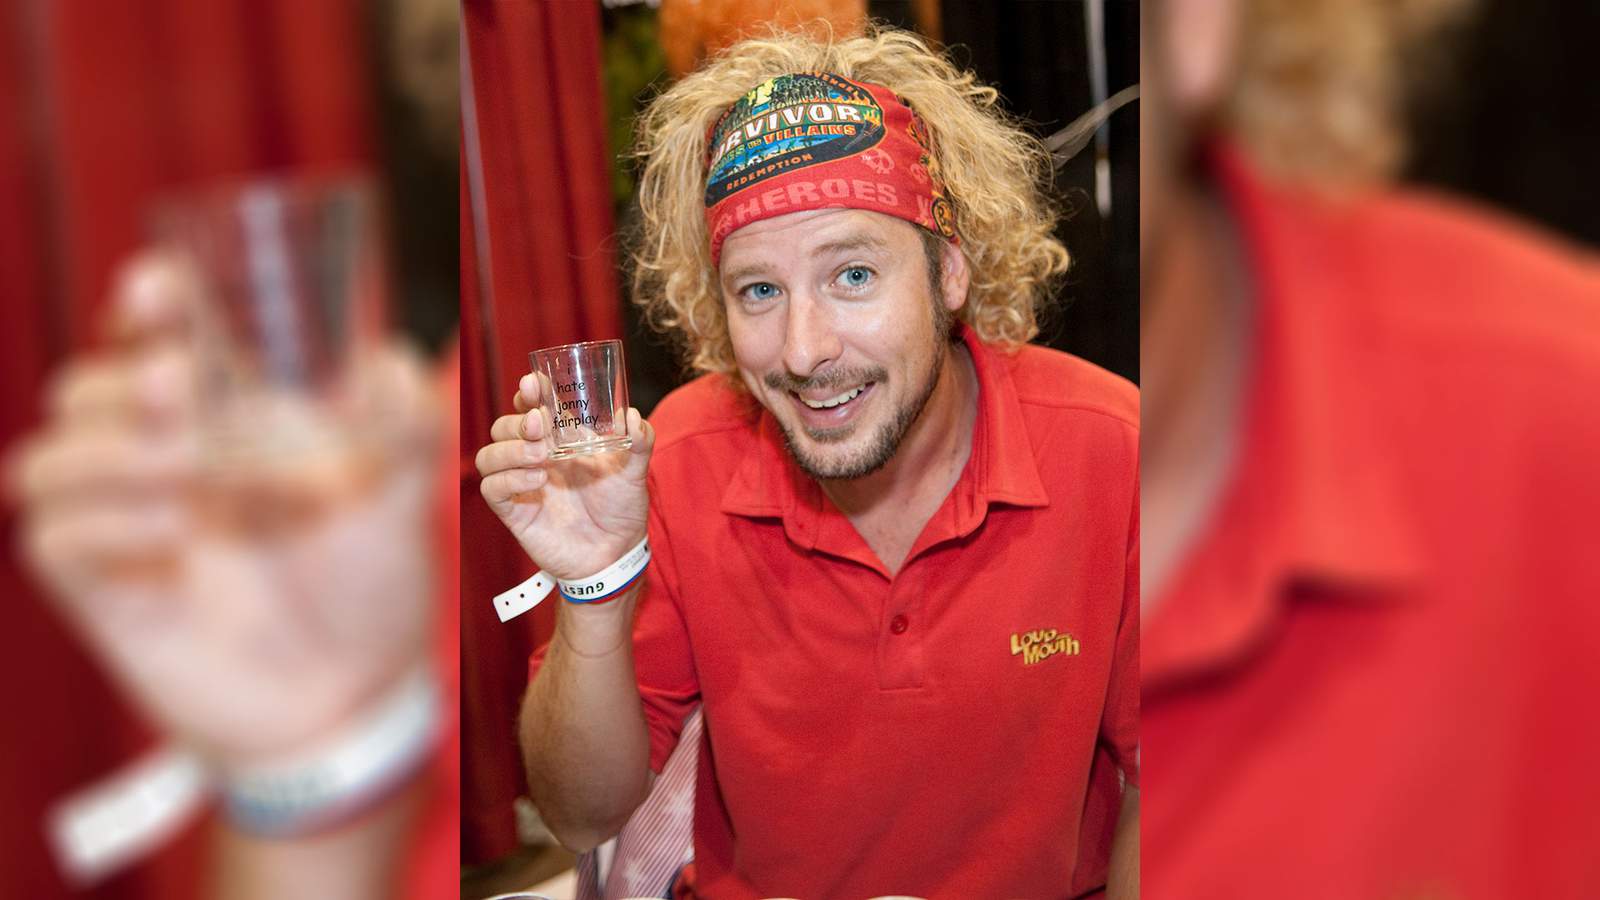 Larceny charges dropped against ‘Survivor’ contestant Jonny Fairplay in Pittsylvania County